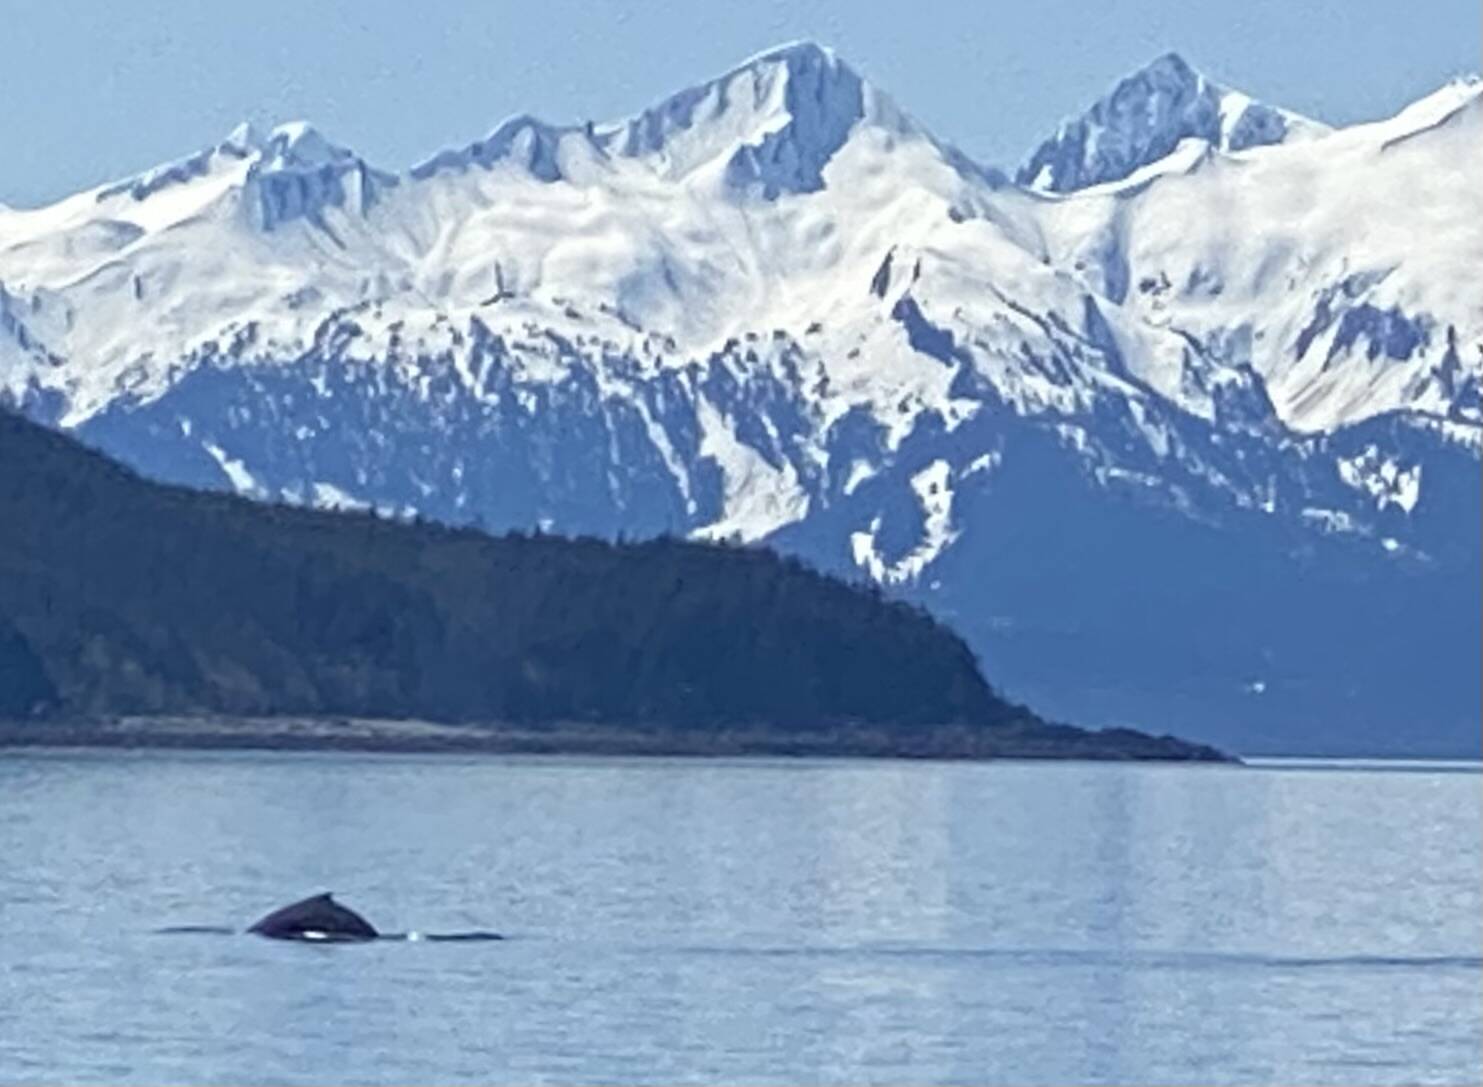 A humpback whale surfaces near the Chilkat mountains on May 21. (Courtesy Photo / Denise Carroll)